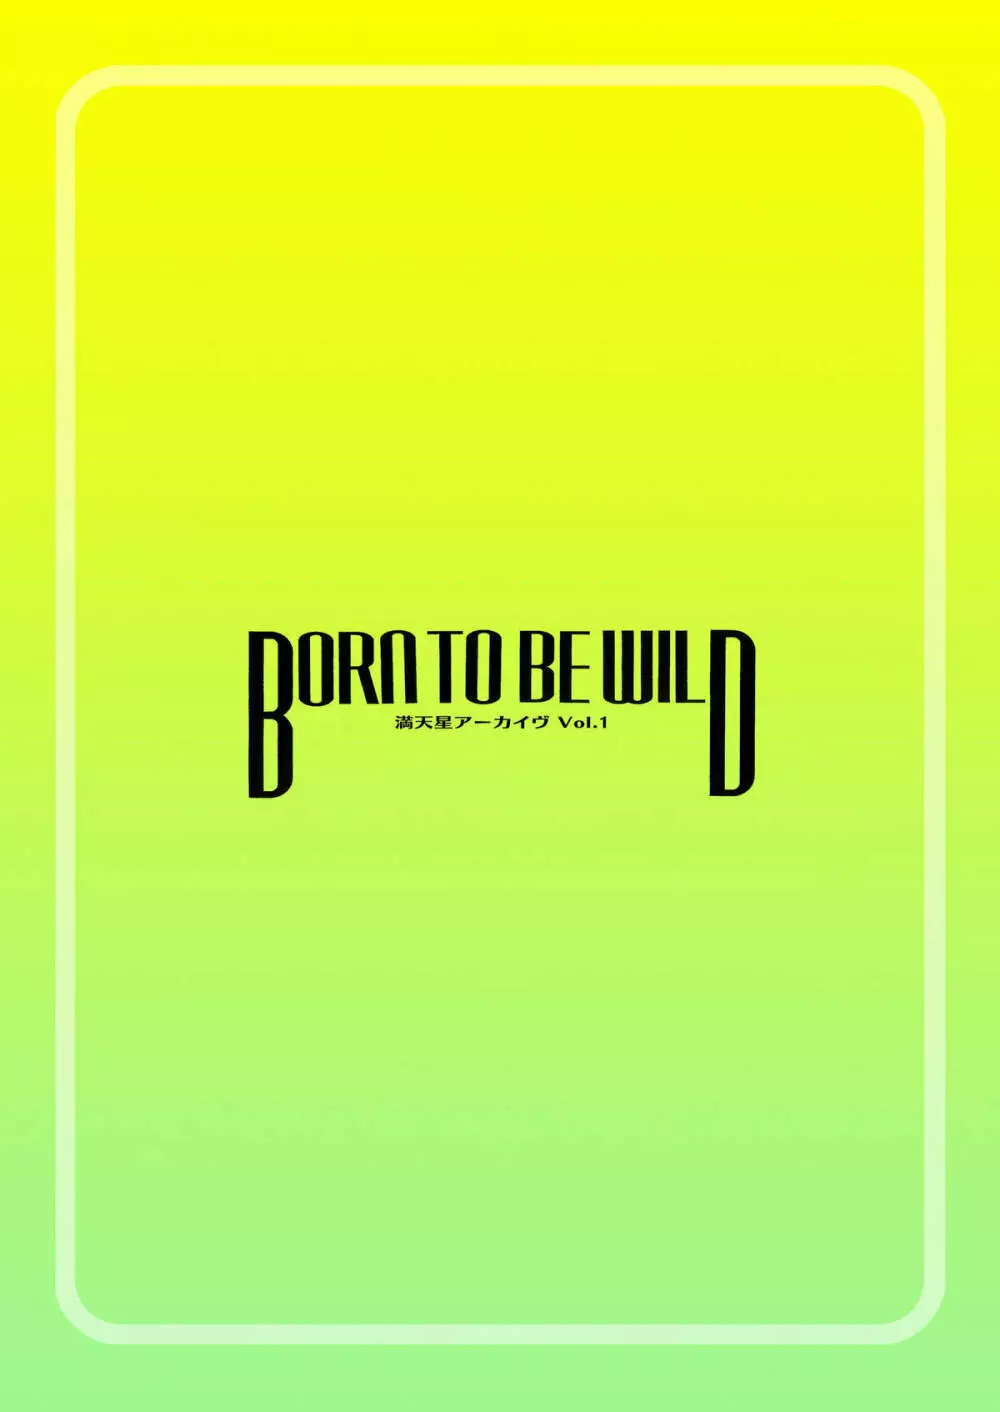 BORN TO BE WILD - page27